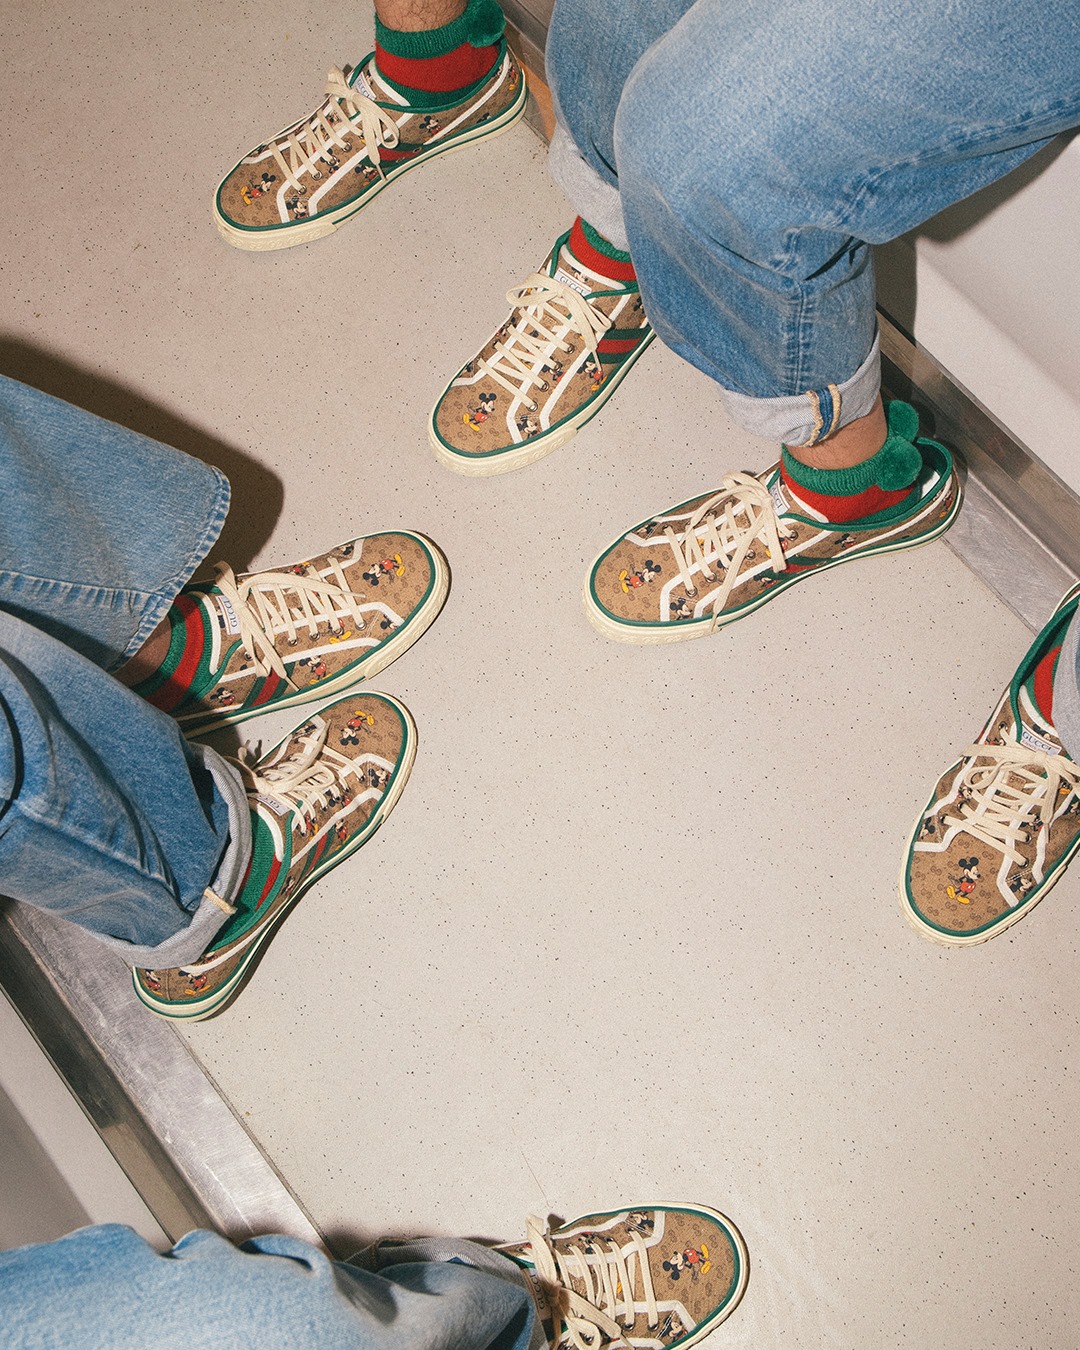 Improbable coincidences turn into hypnotic imagery for Accidental Influencer, the new series to present the Gucci Tennis 1977 sneaker. Discover more on.gucci.com/GucciTennis1977_. 